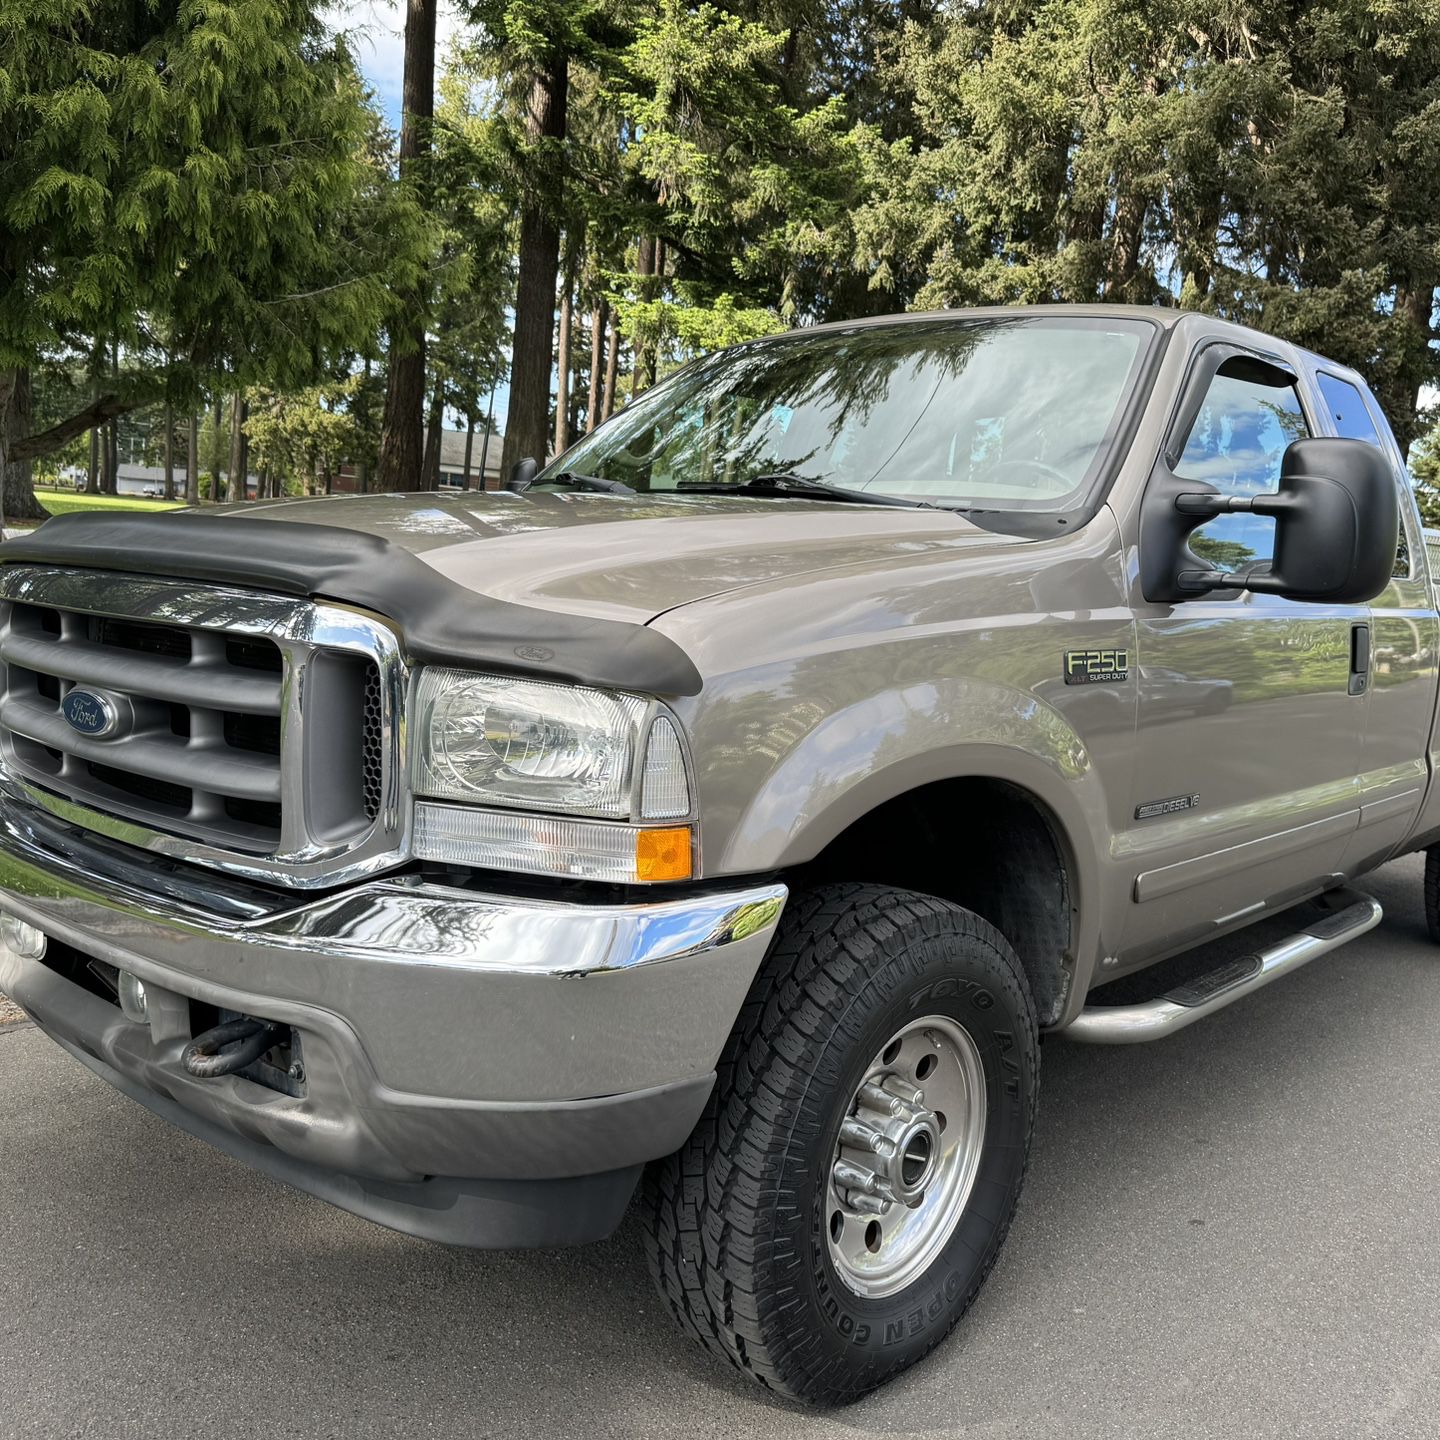 2002 Ford F-250 Extended Cab Long Bed 4WD 7.3L Power Stroke Turbo Diesel Low Miles 